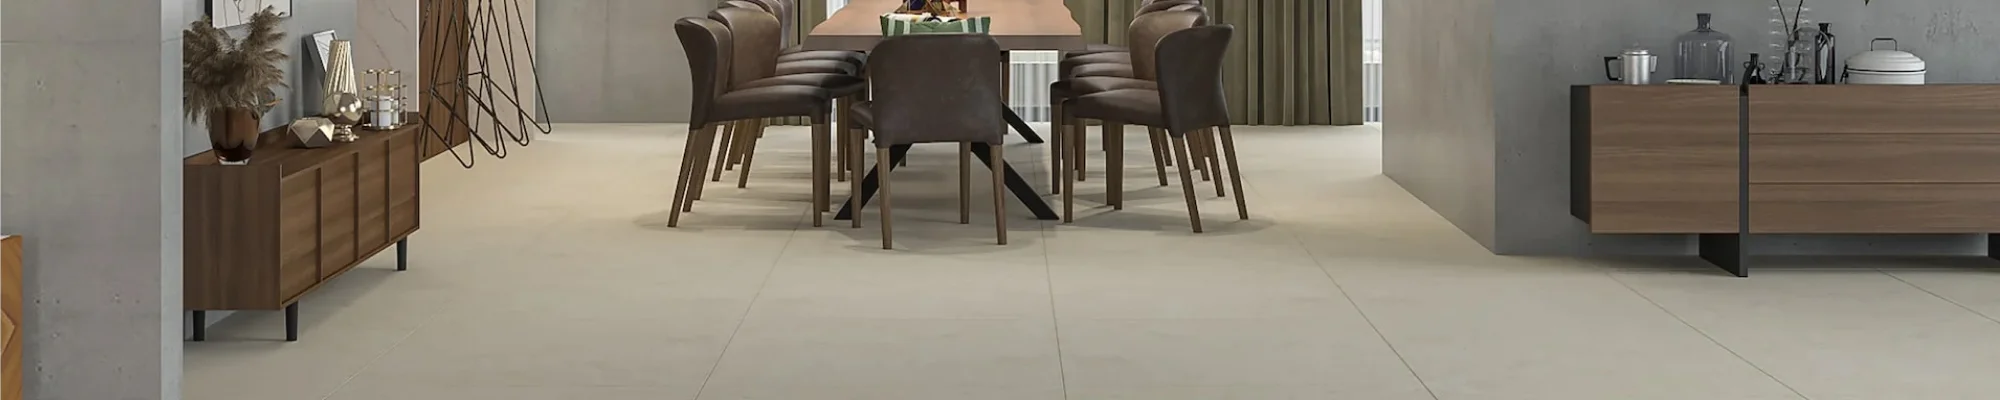 Learn more about tile flooring - a practical and long-lasting flooring option